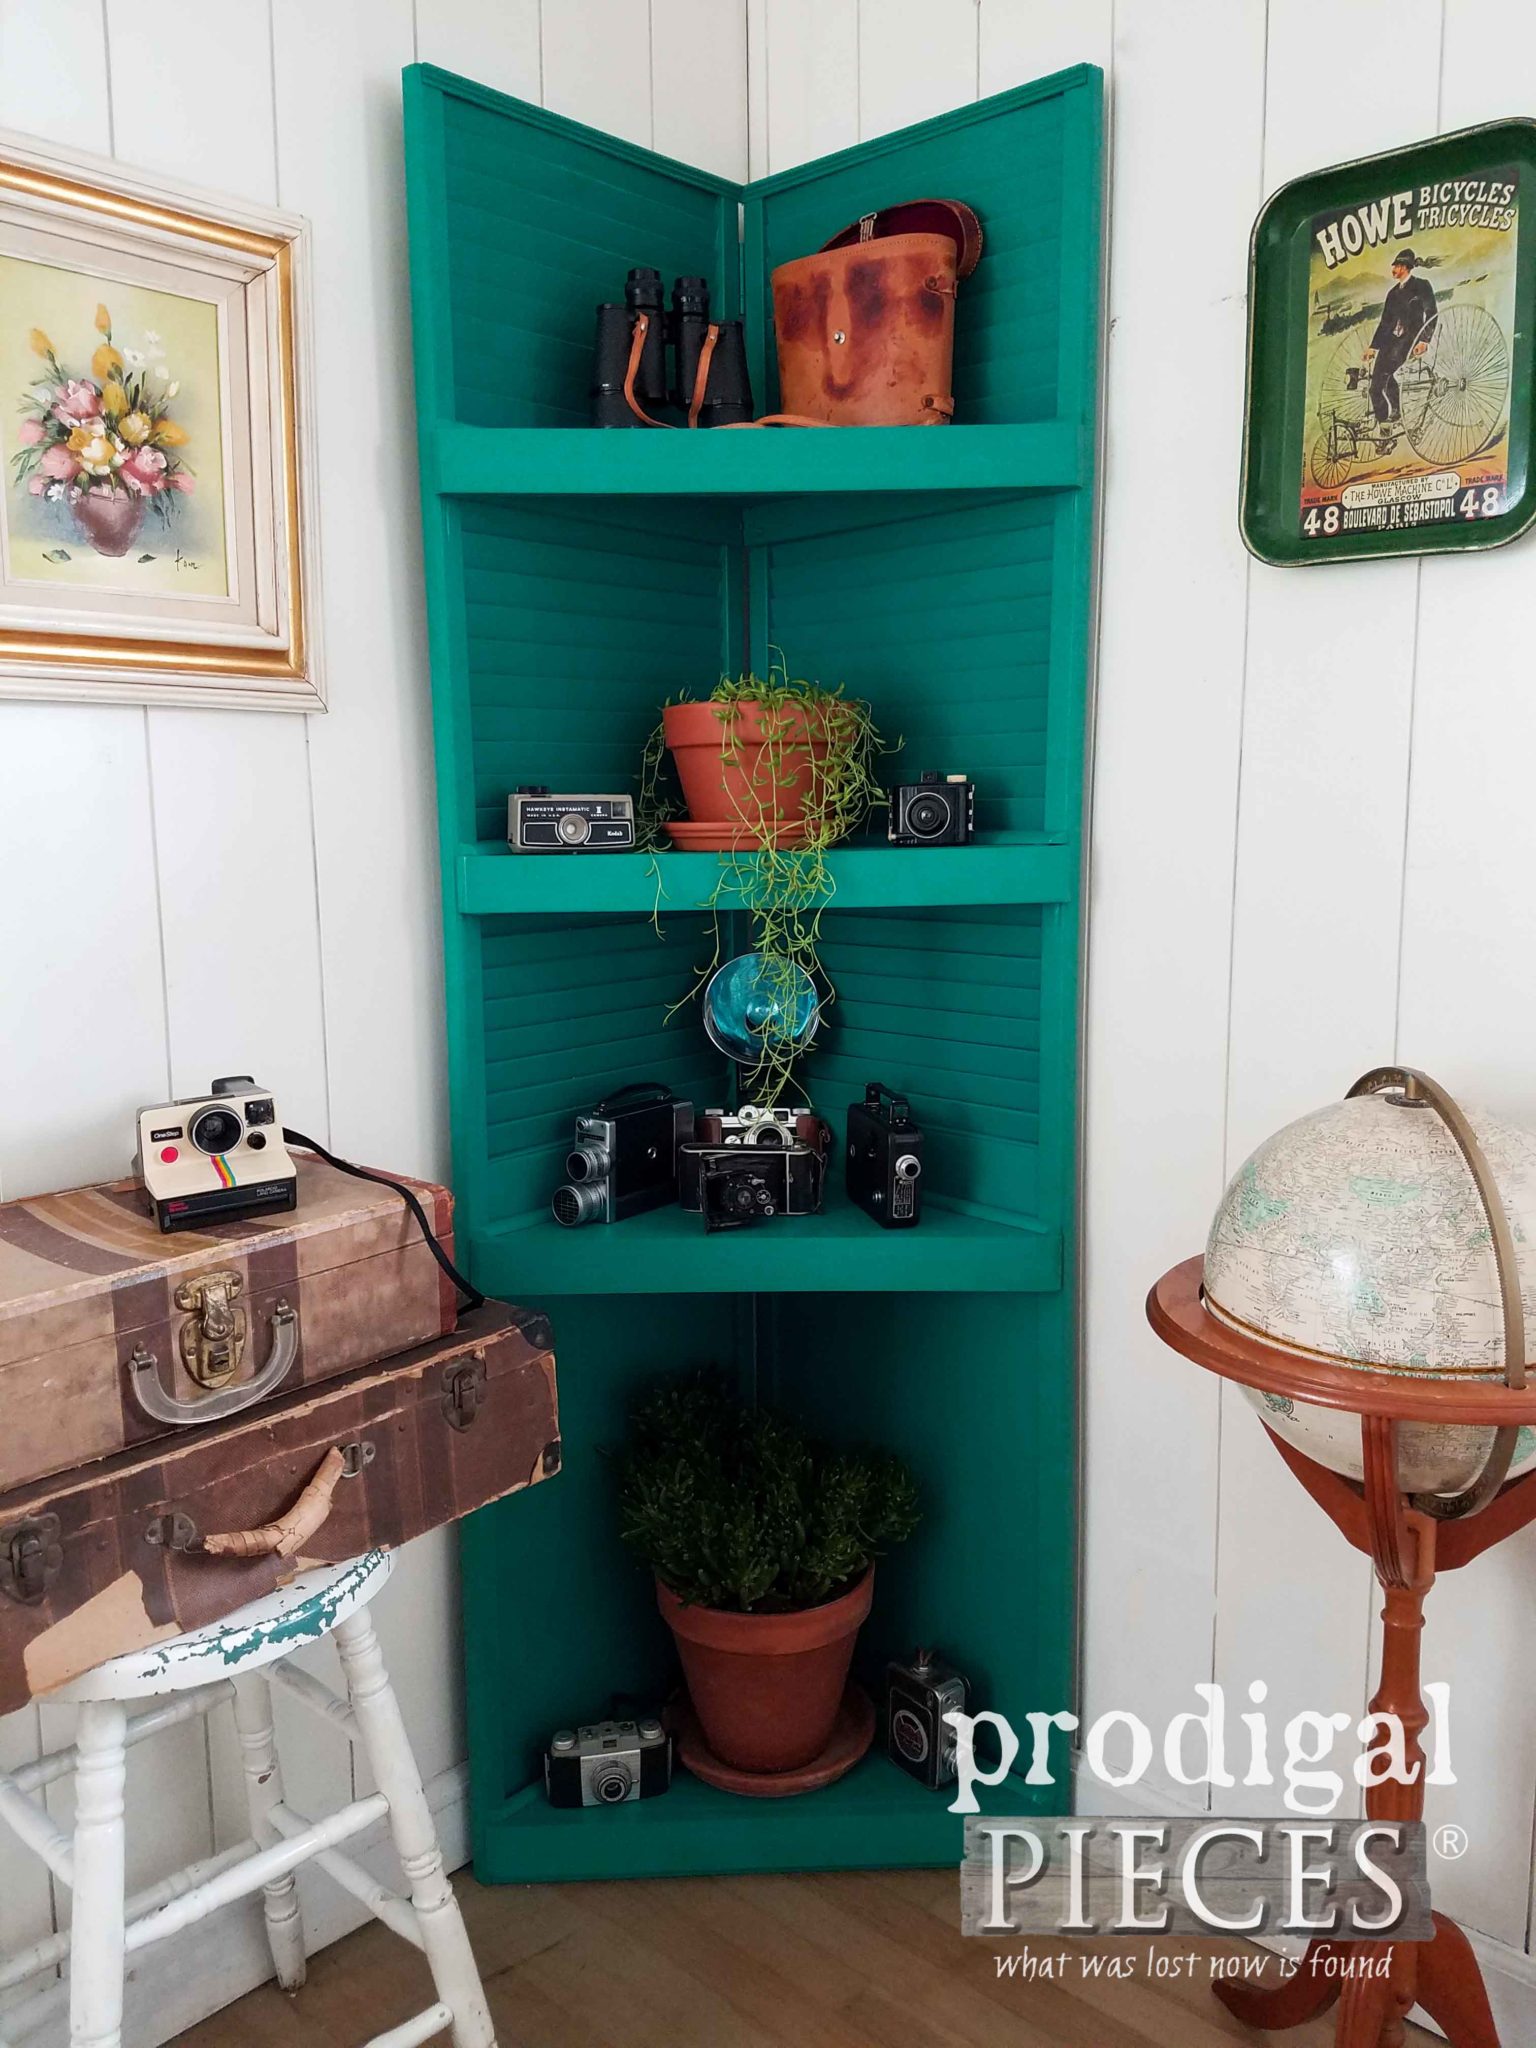 DIY Repurposed Corner Shelf Built out of Wooden Louver Doors by Larissa of Prodigal Pieces | prodigalpieces.com